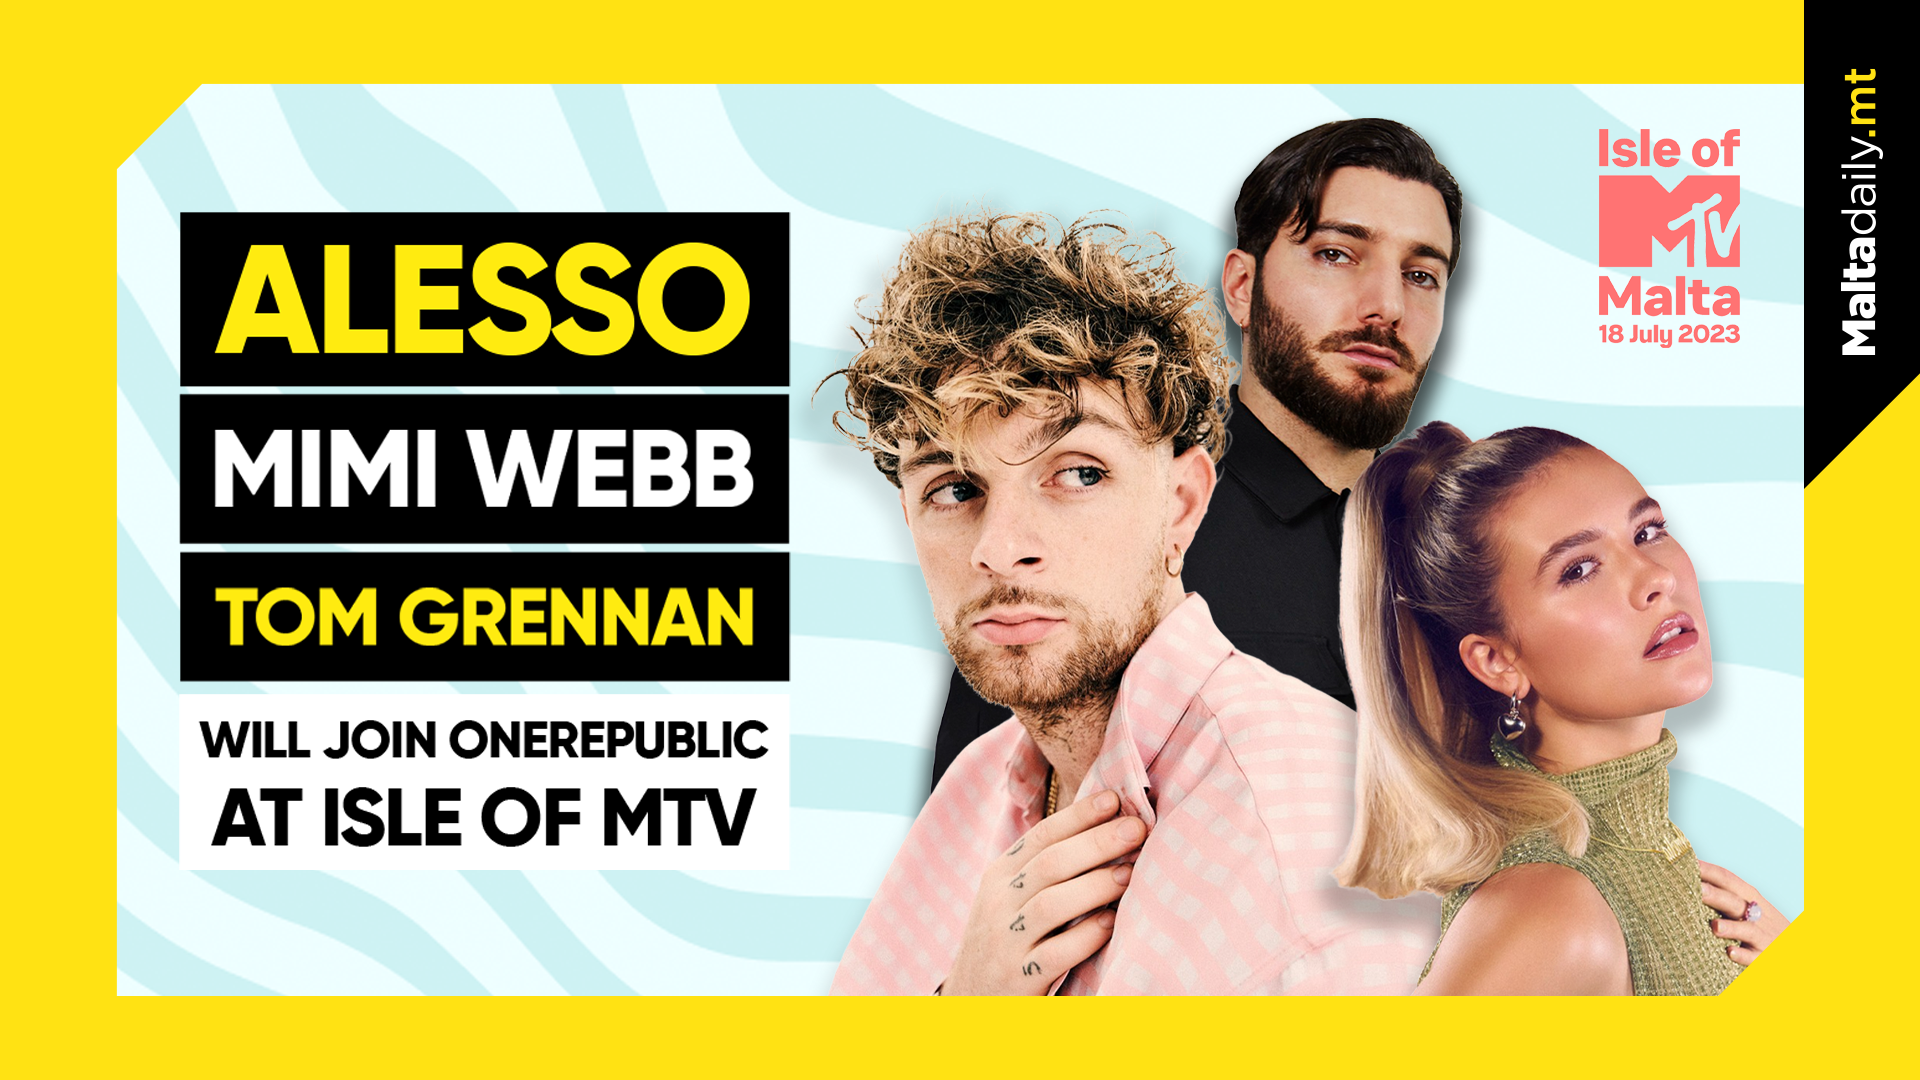 ALESSO, MIMI WEBB & TOM GRENNAN WILL JOIN ONE REPUBLIC AT ISLE OF MTV